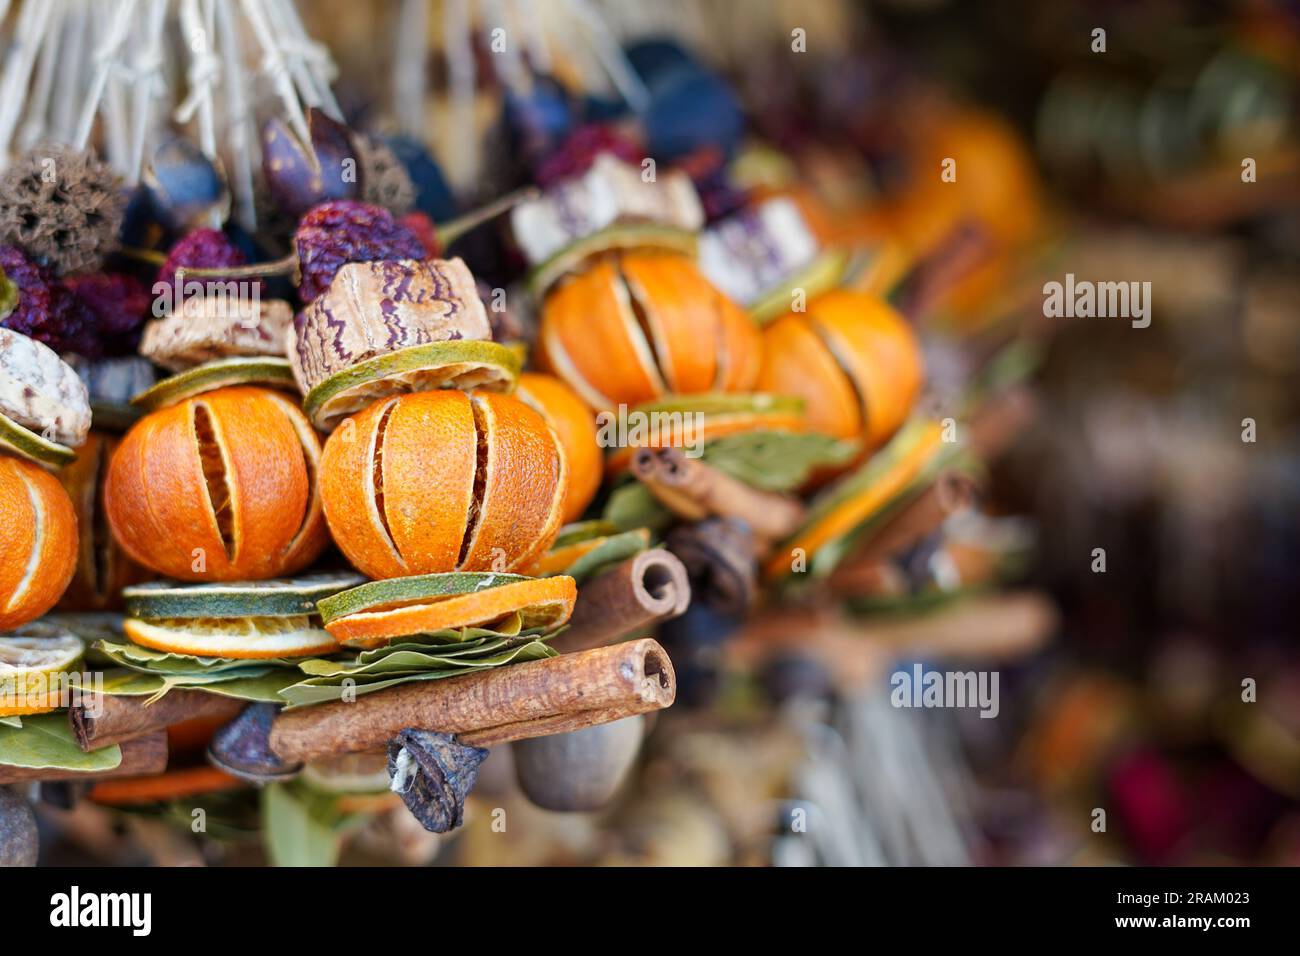 collection of dried fruit, vegetables and spices on the market Stock Photo